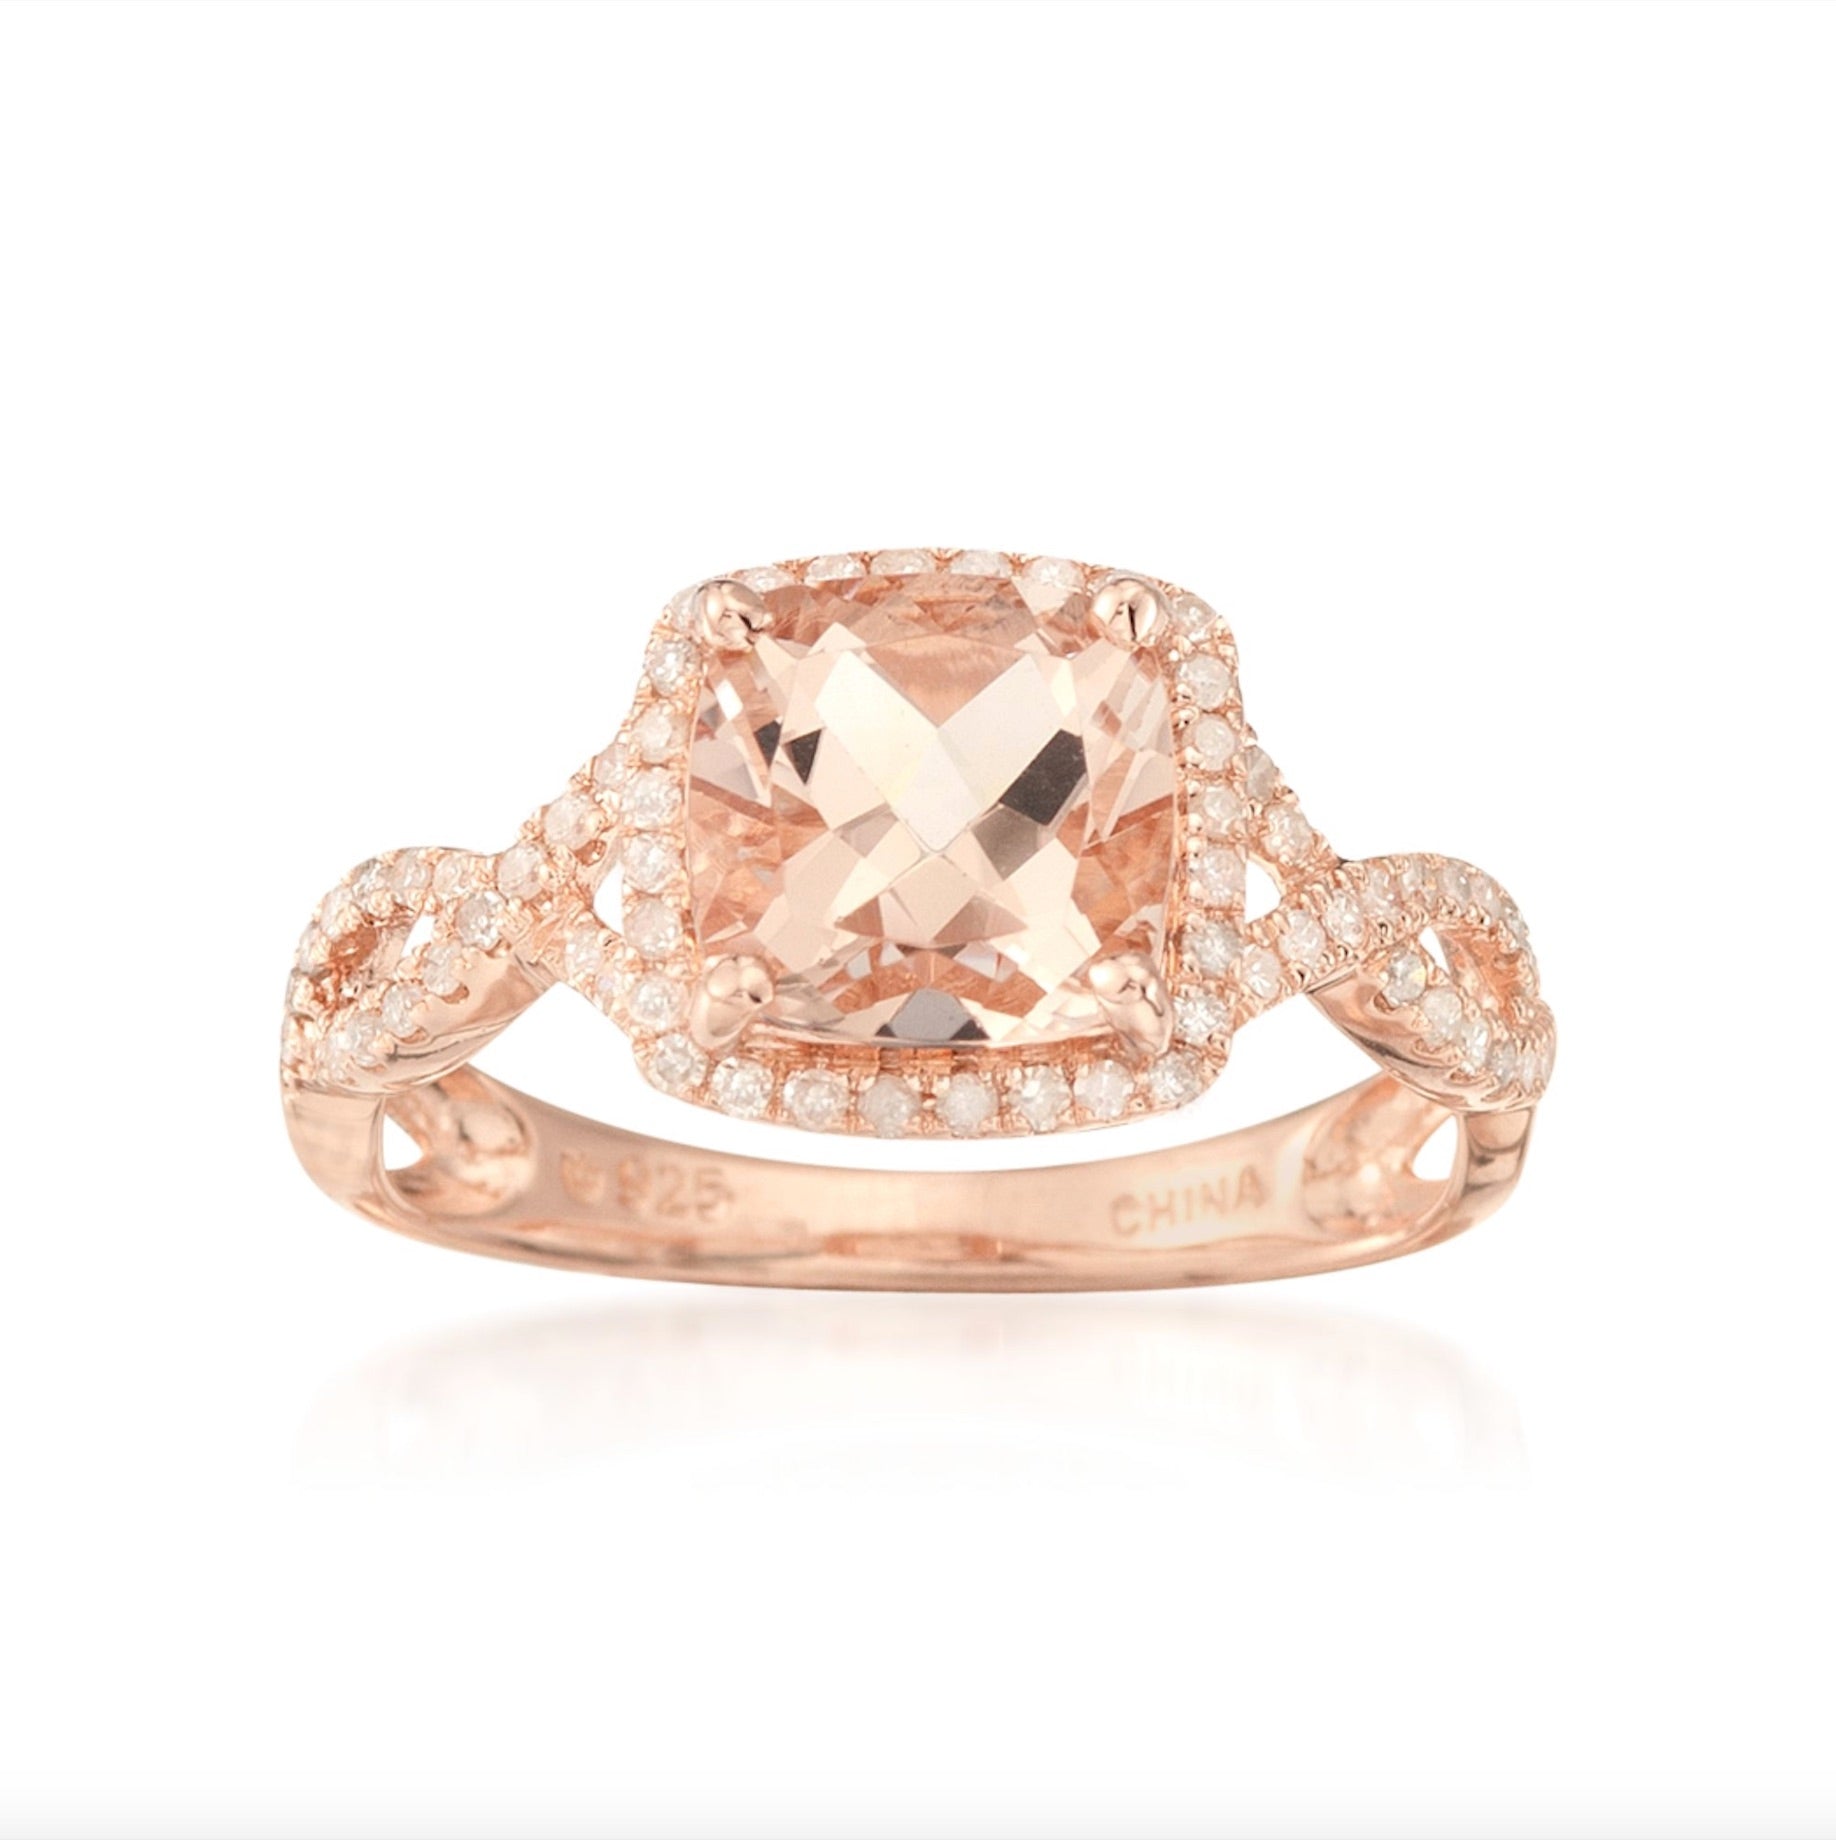 14k Rose Gold Morganite and Diamond Cushion Infinity Shank Engagement Ring (1/4cttw, H-I Color, SI1-SI2 Clarity), - pinctore